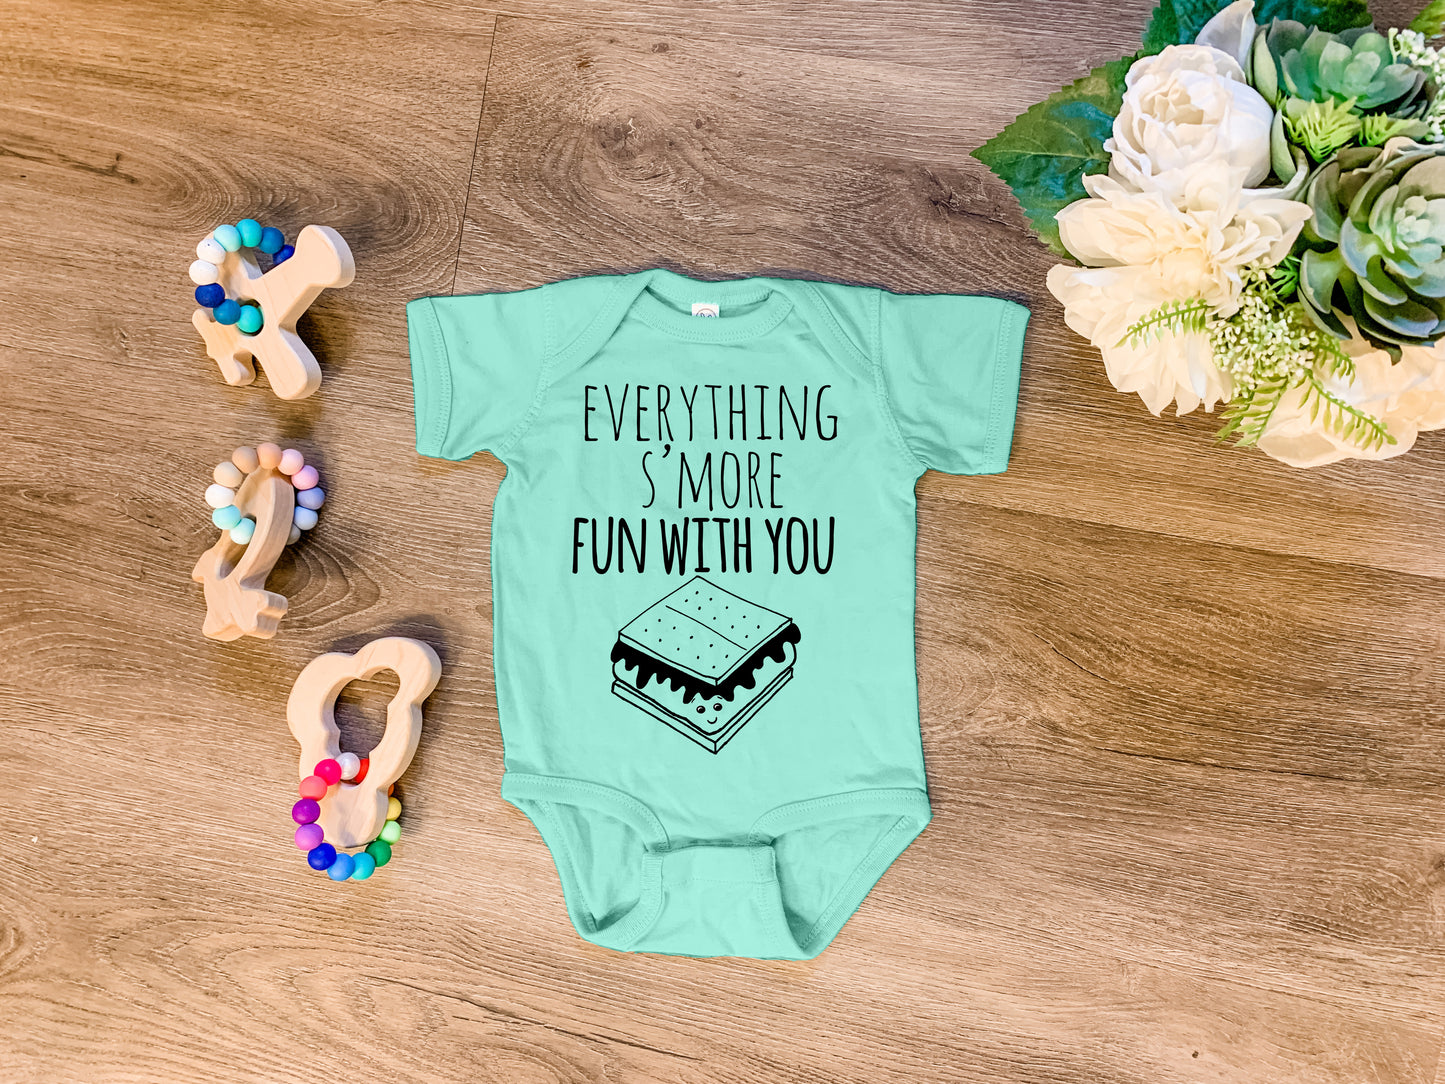 Everything S'more Fun With You - Onesie - Heather Gray, Chill, or Lavender